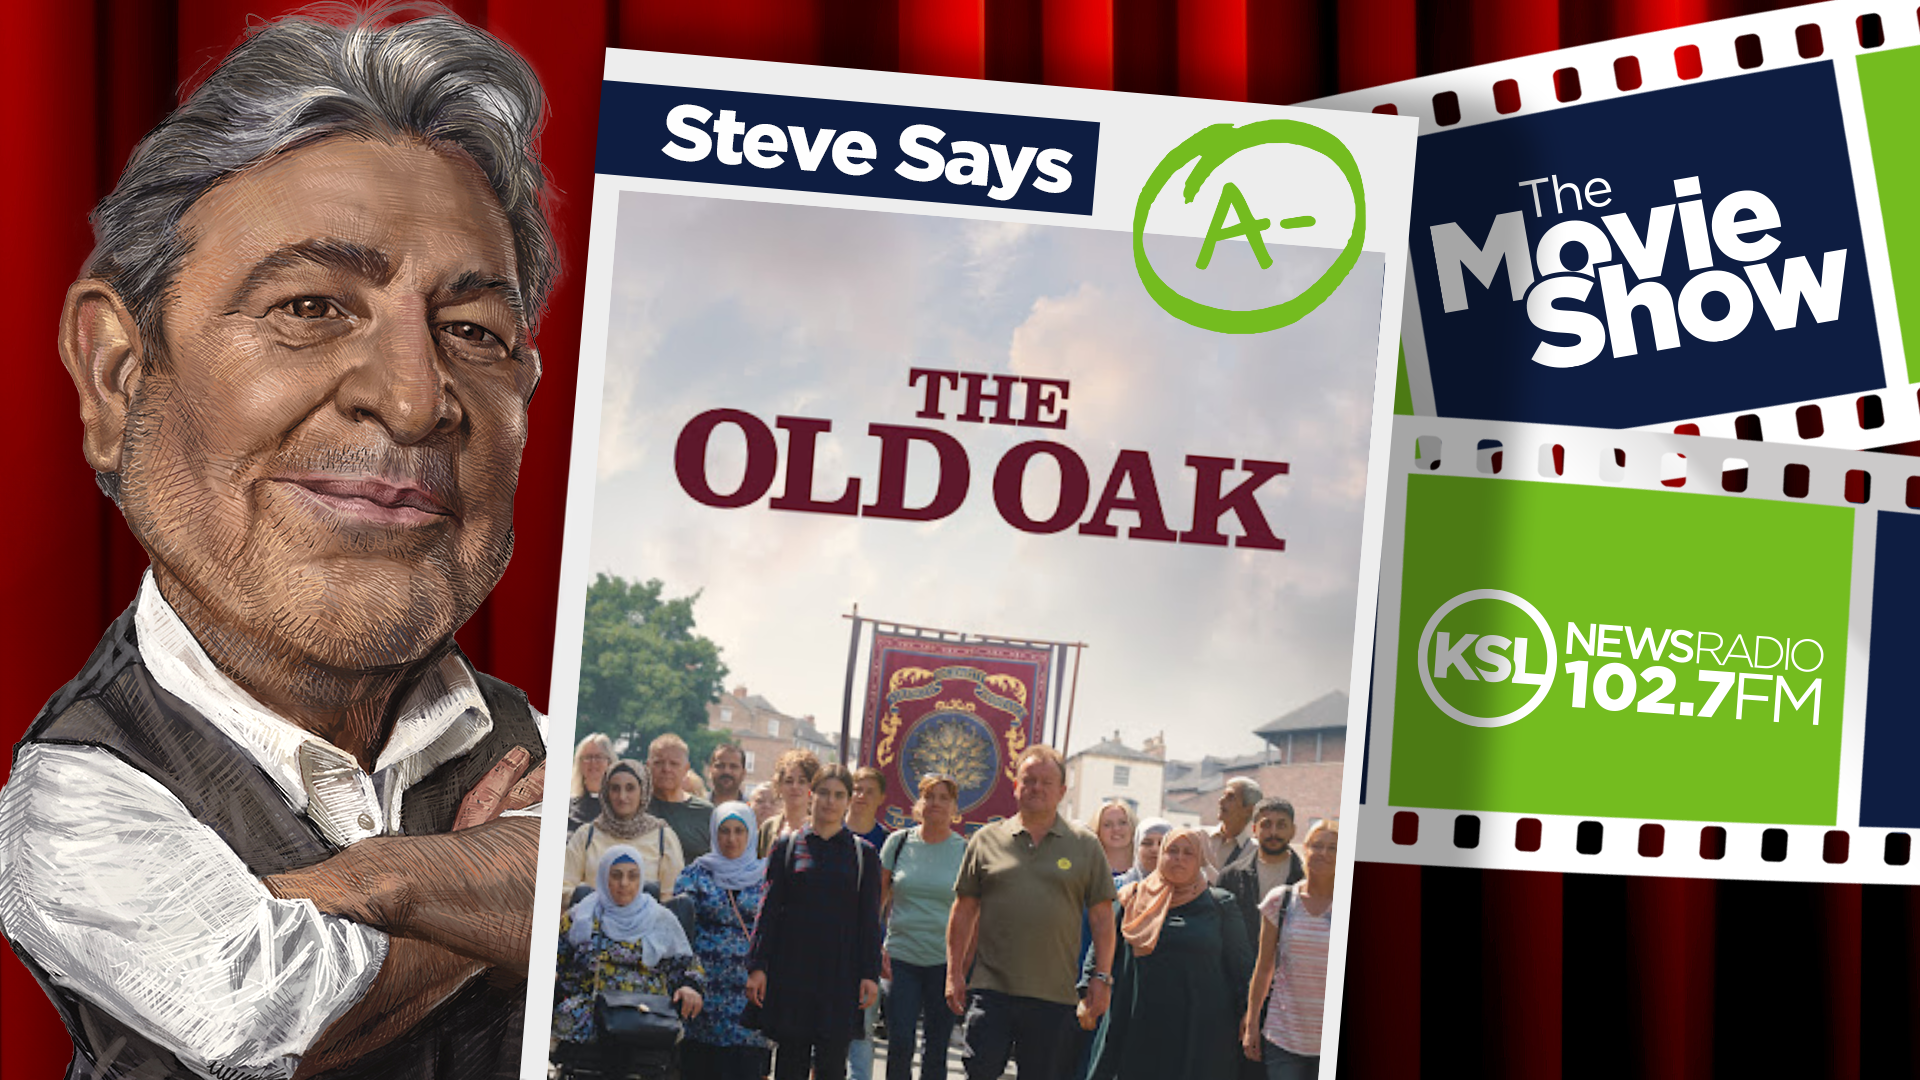 'The Old Oak' might have a few f-bombs, but it's worth your time to see....